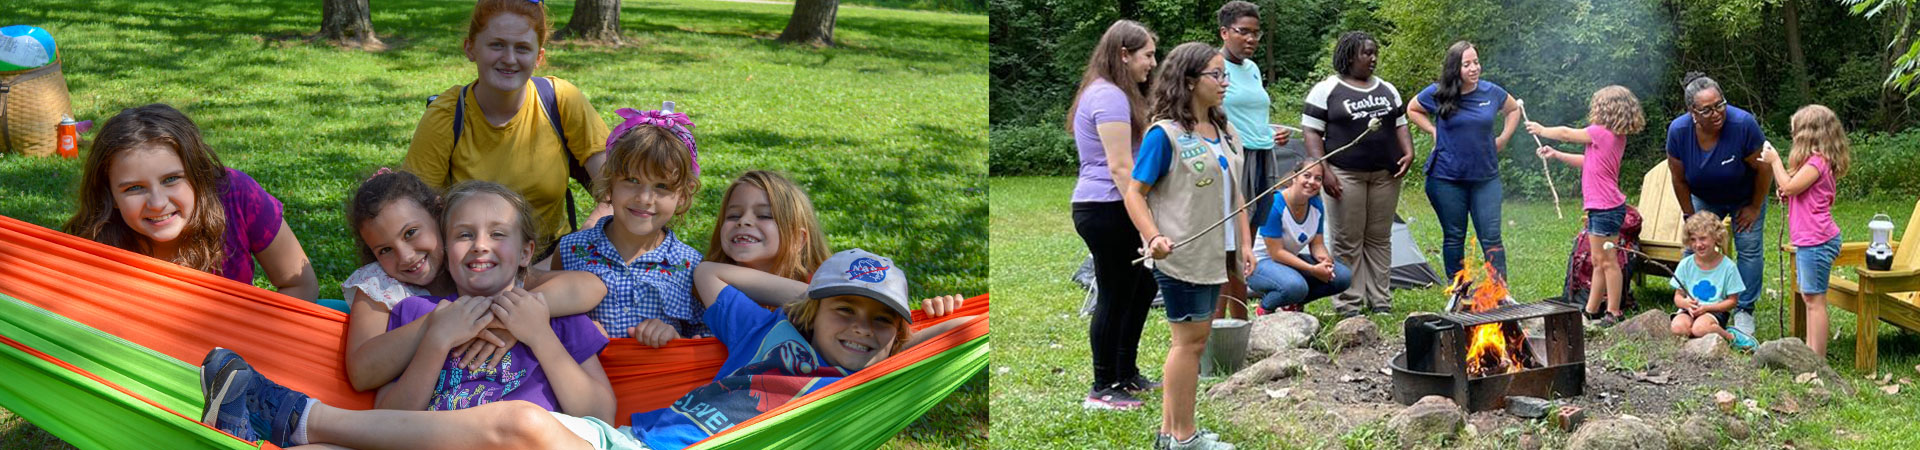  adult volunteer wearing vest with a girl scout junior (right, in baseball cap) and daisy (left) outside at a park smiling and looking at one another 